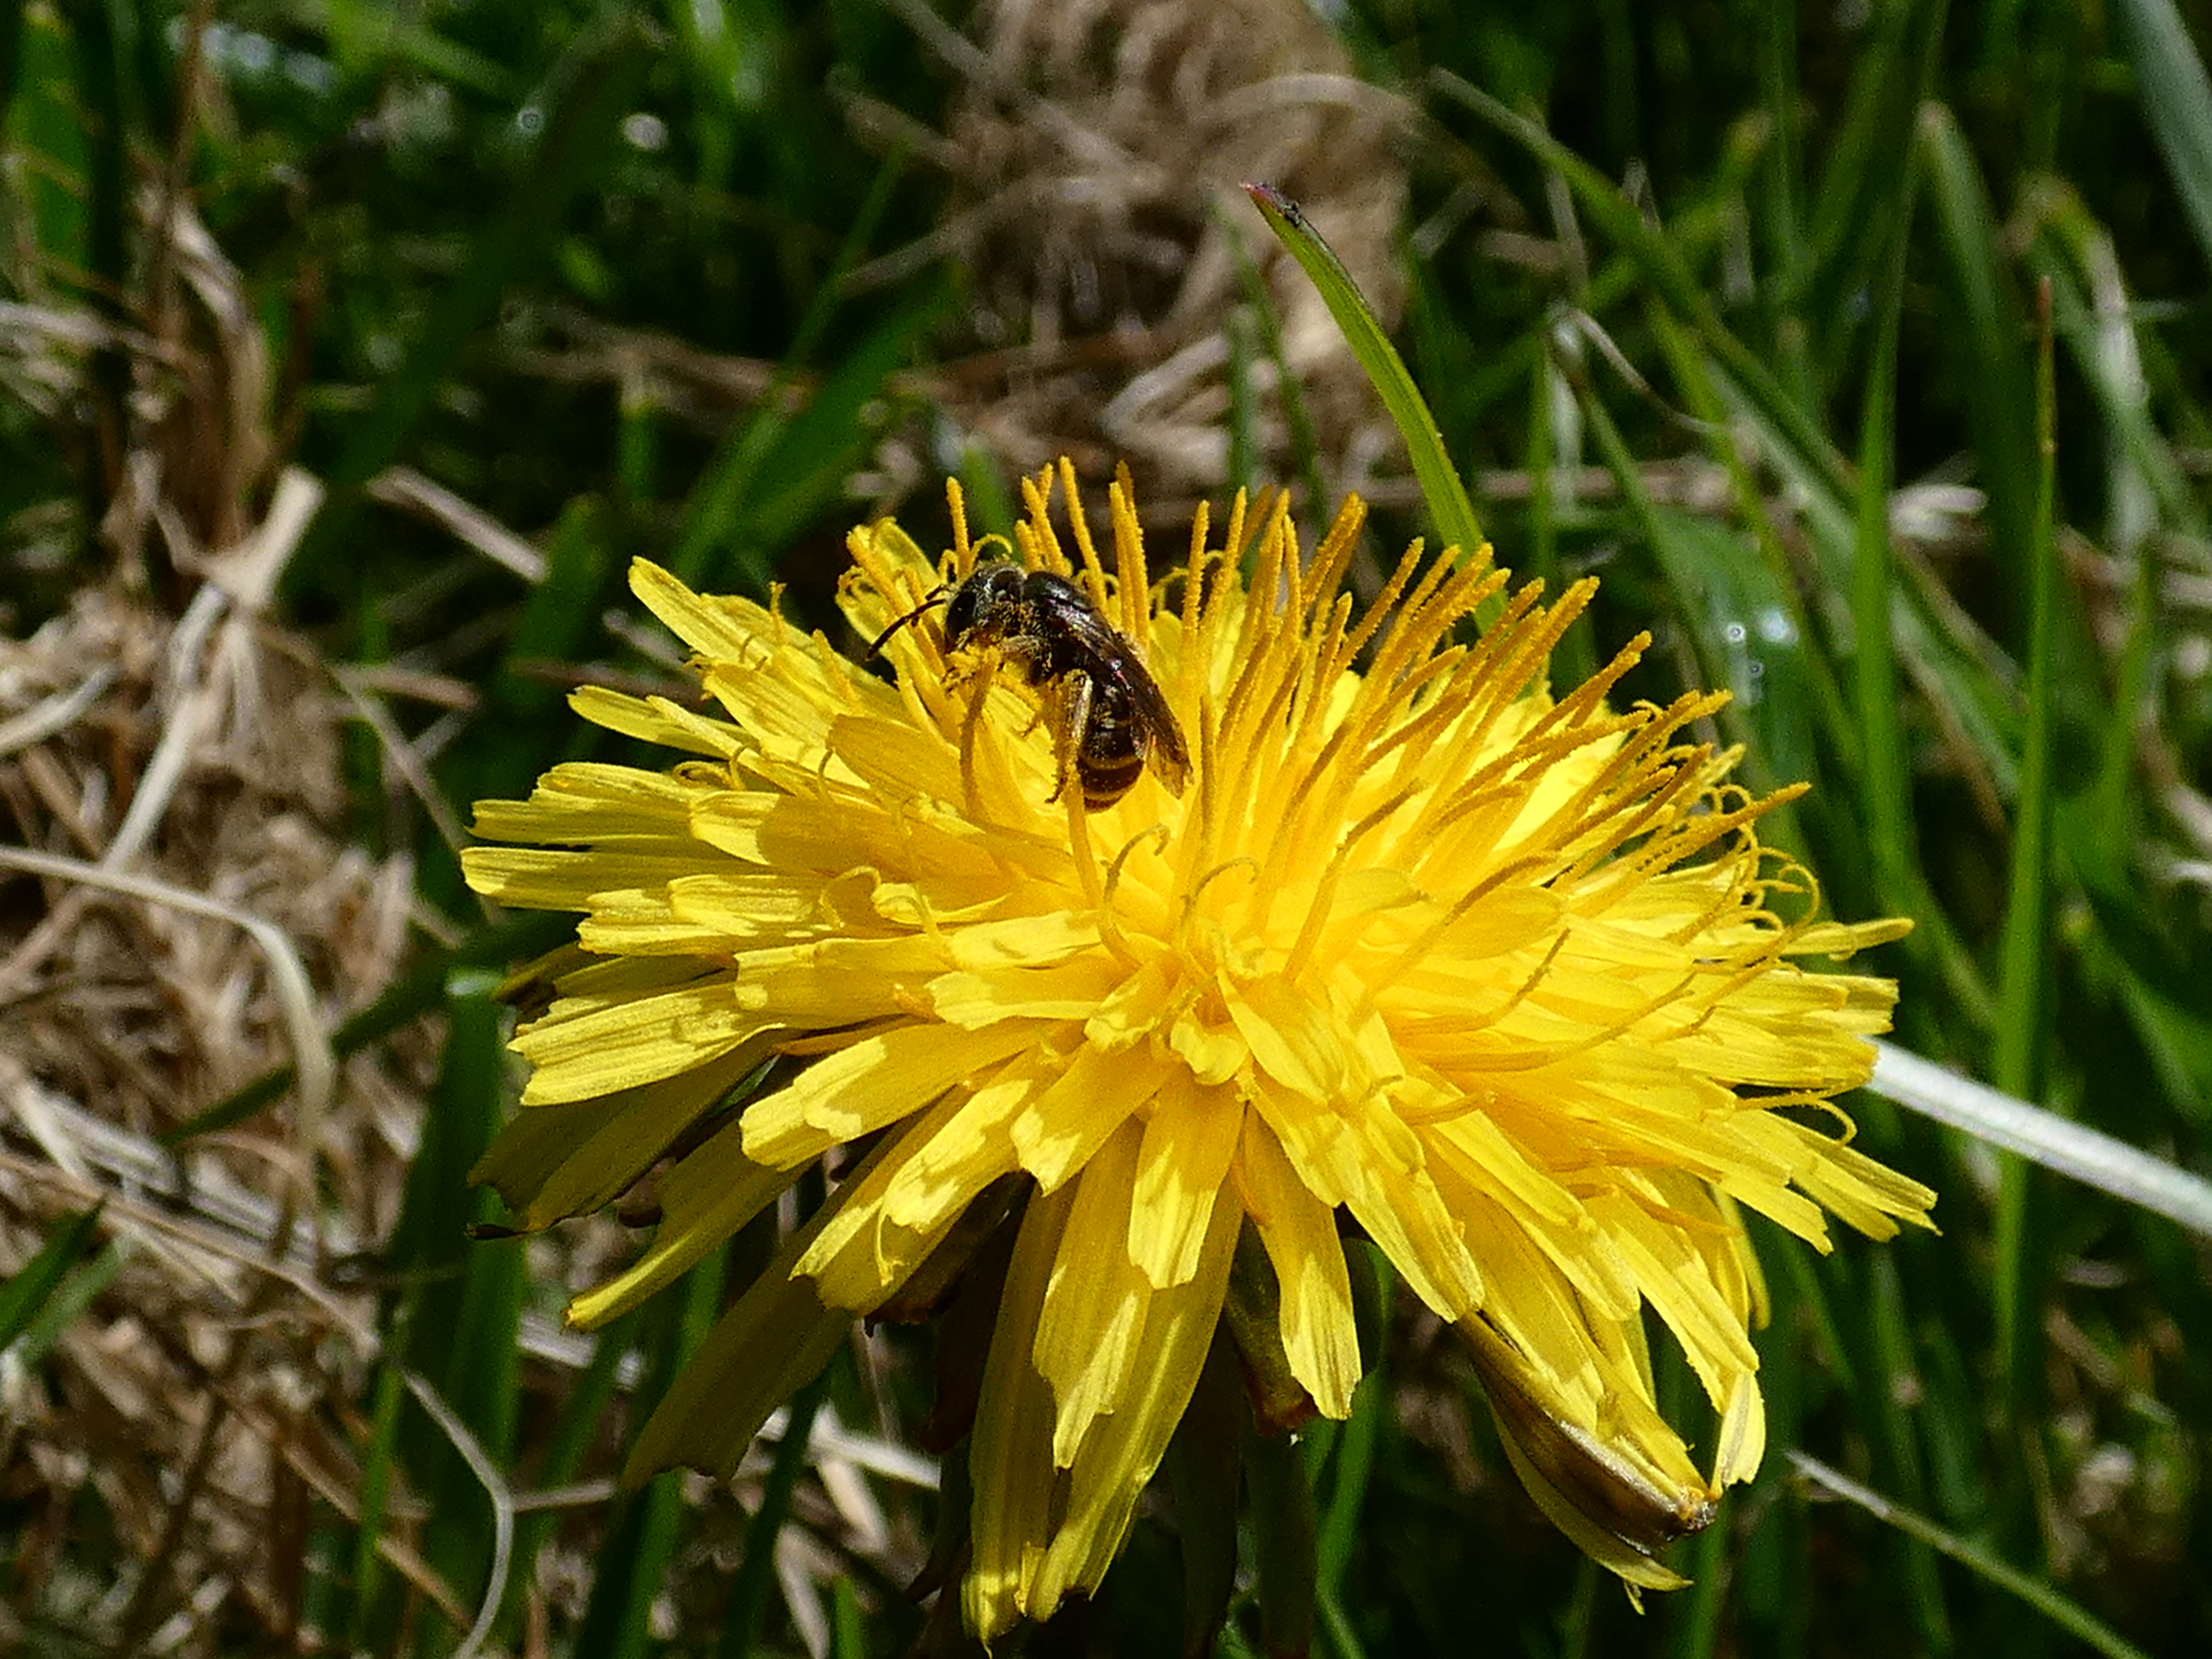 This dandelion is yellow with a surface for an insect to land on.